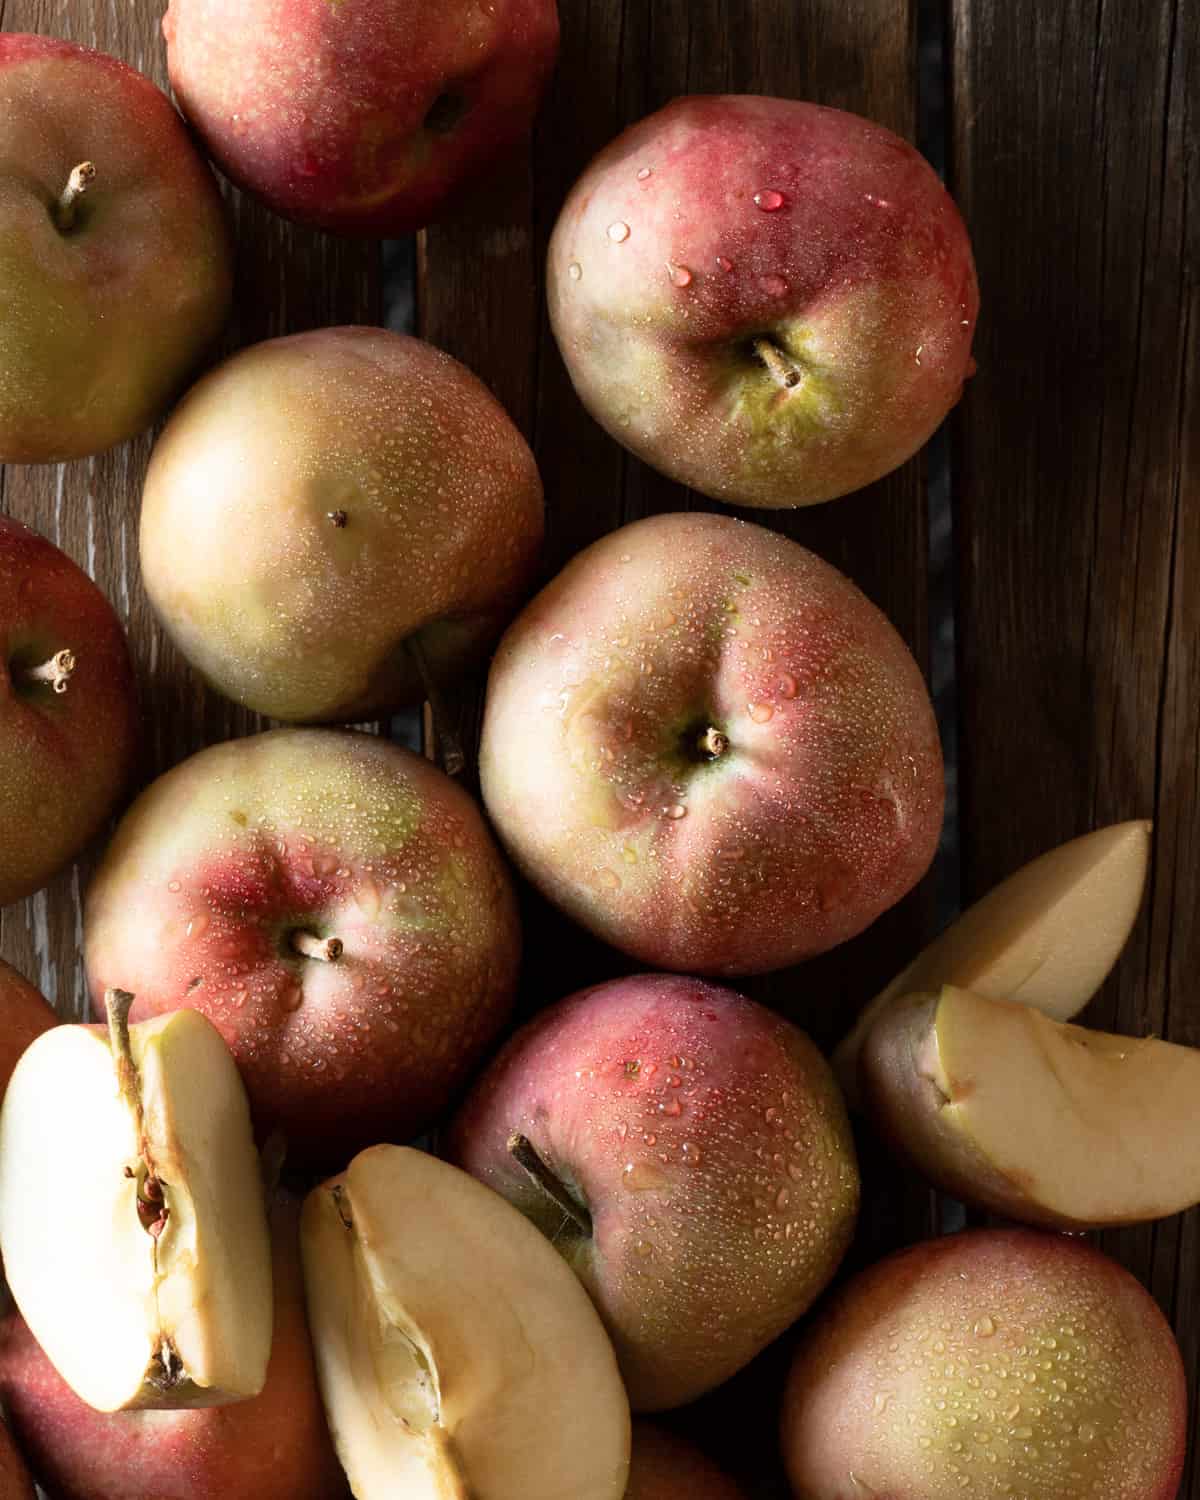 Closeup image of washed red McIntosh apples, some are cut into quarters and some are whole.